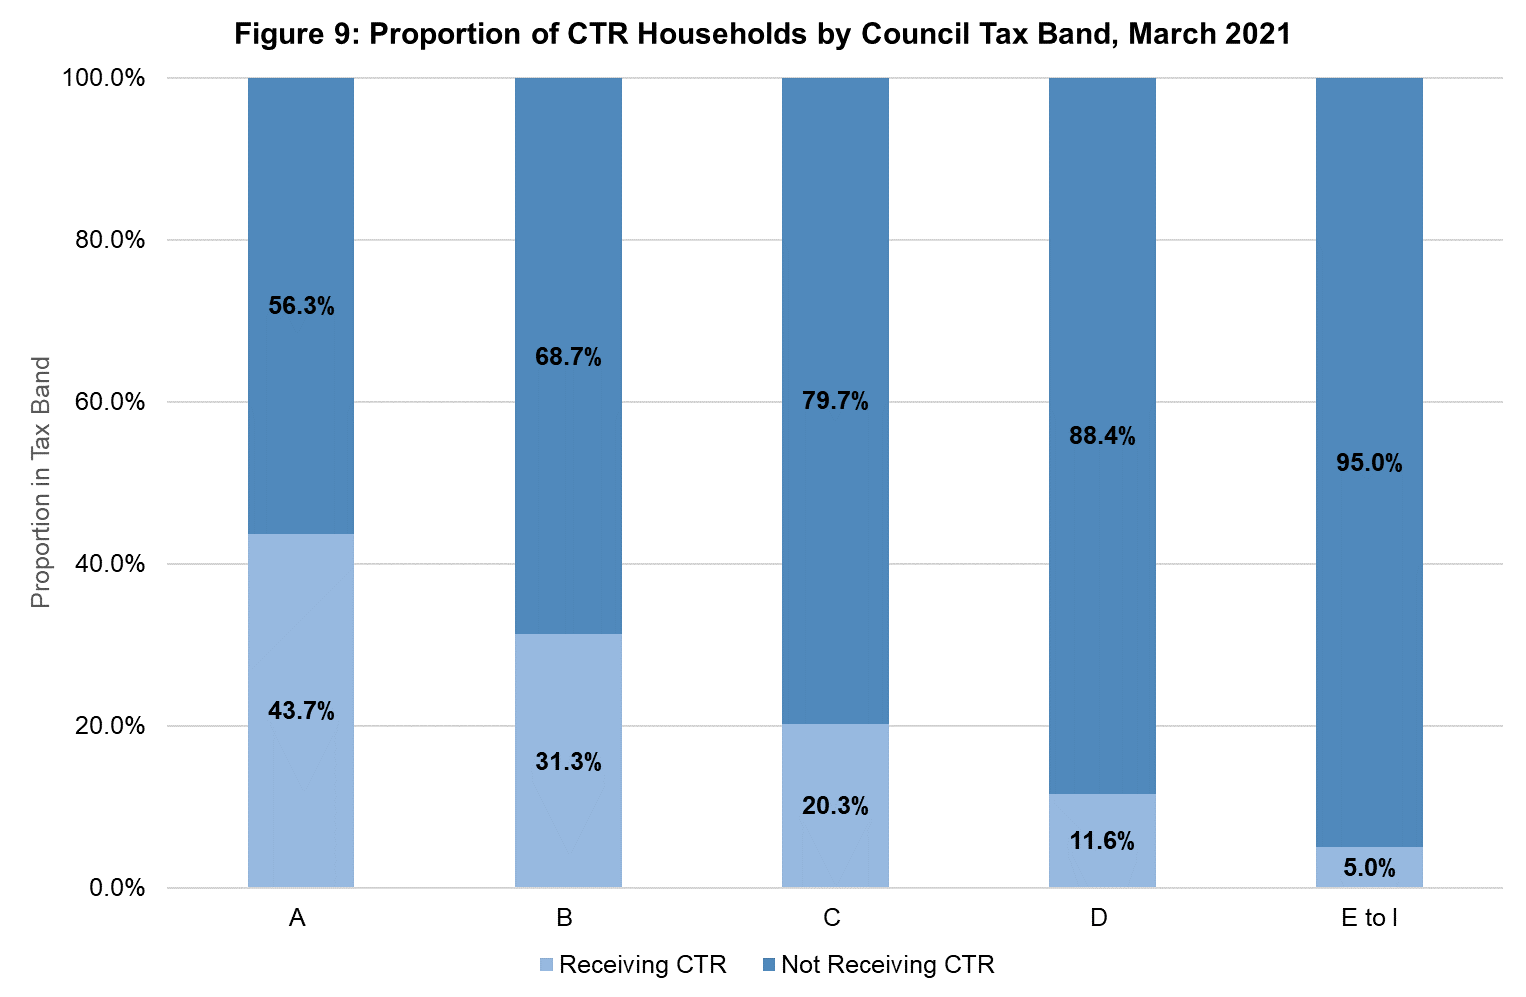 Figure 9 shows the proportion of CTR Households by council tax band in March 2021.  The bars in this chart show that in Band A 43.7% of households receive a CTR, 56.3% do not.  In Band B 31.3% of housholds receive a CTR, 68.7% do not. In band C 20.3% receive a CTR, 79.7% do not. In Band D 11.6% receive a CTR, 88.4% do not.  In Bands E to I 5% recieve a CTR and 95% do not.